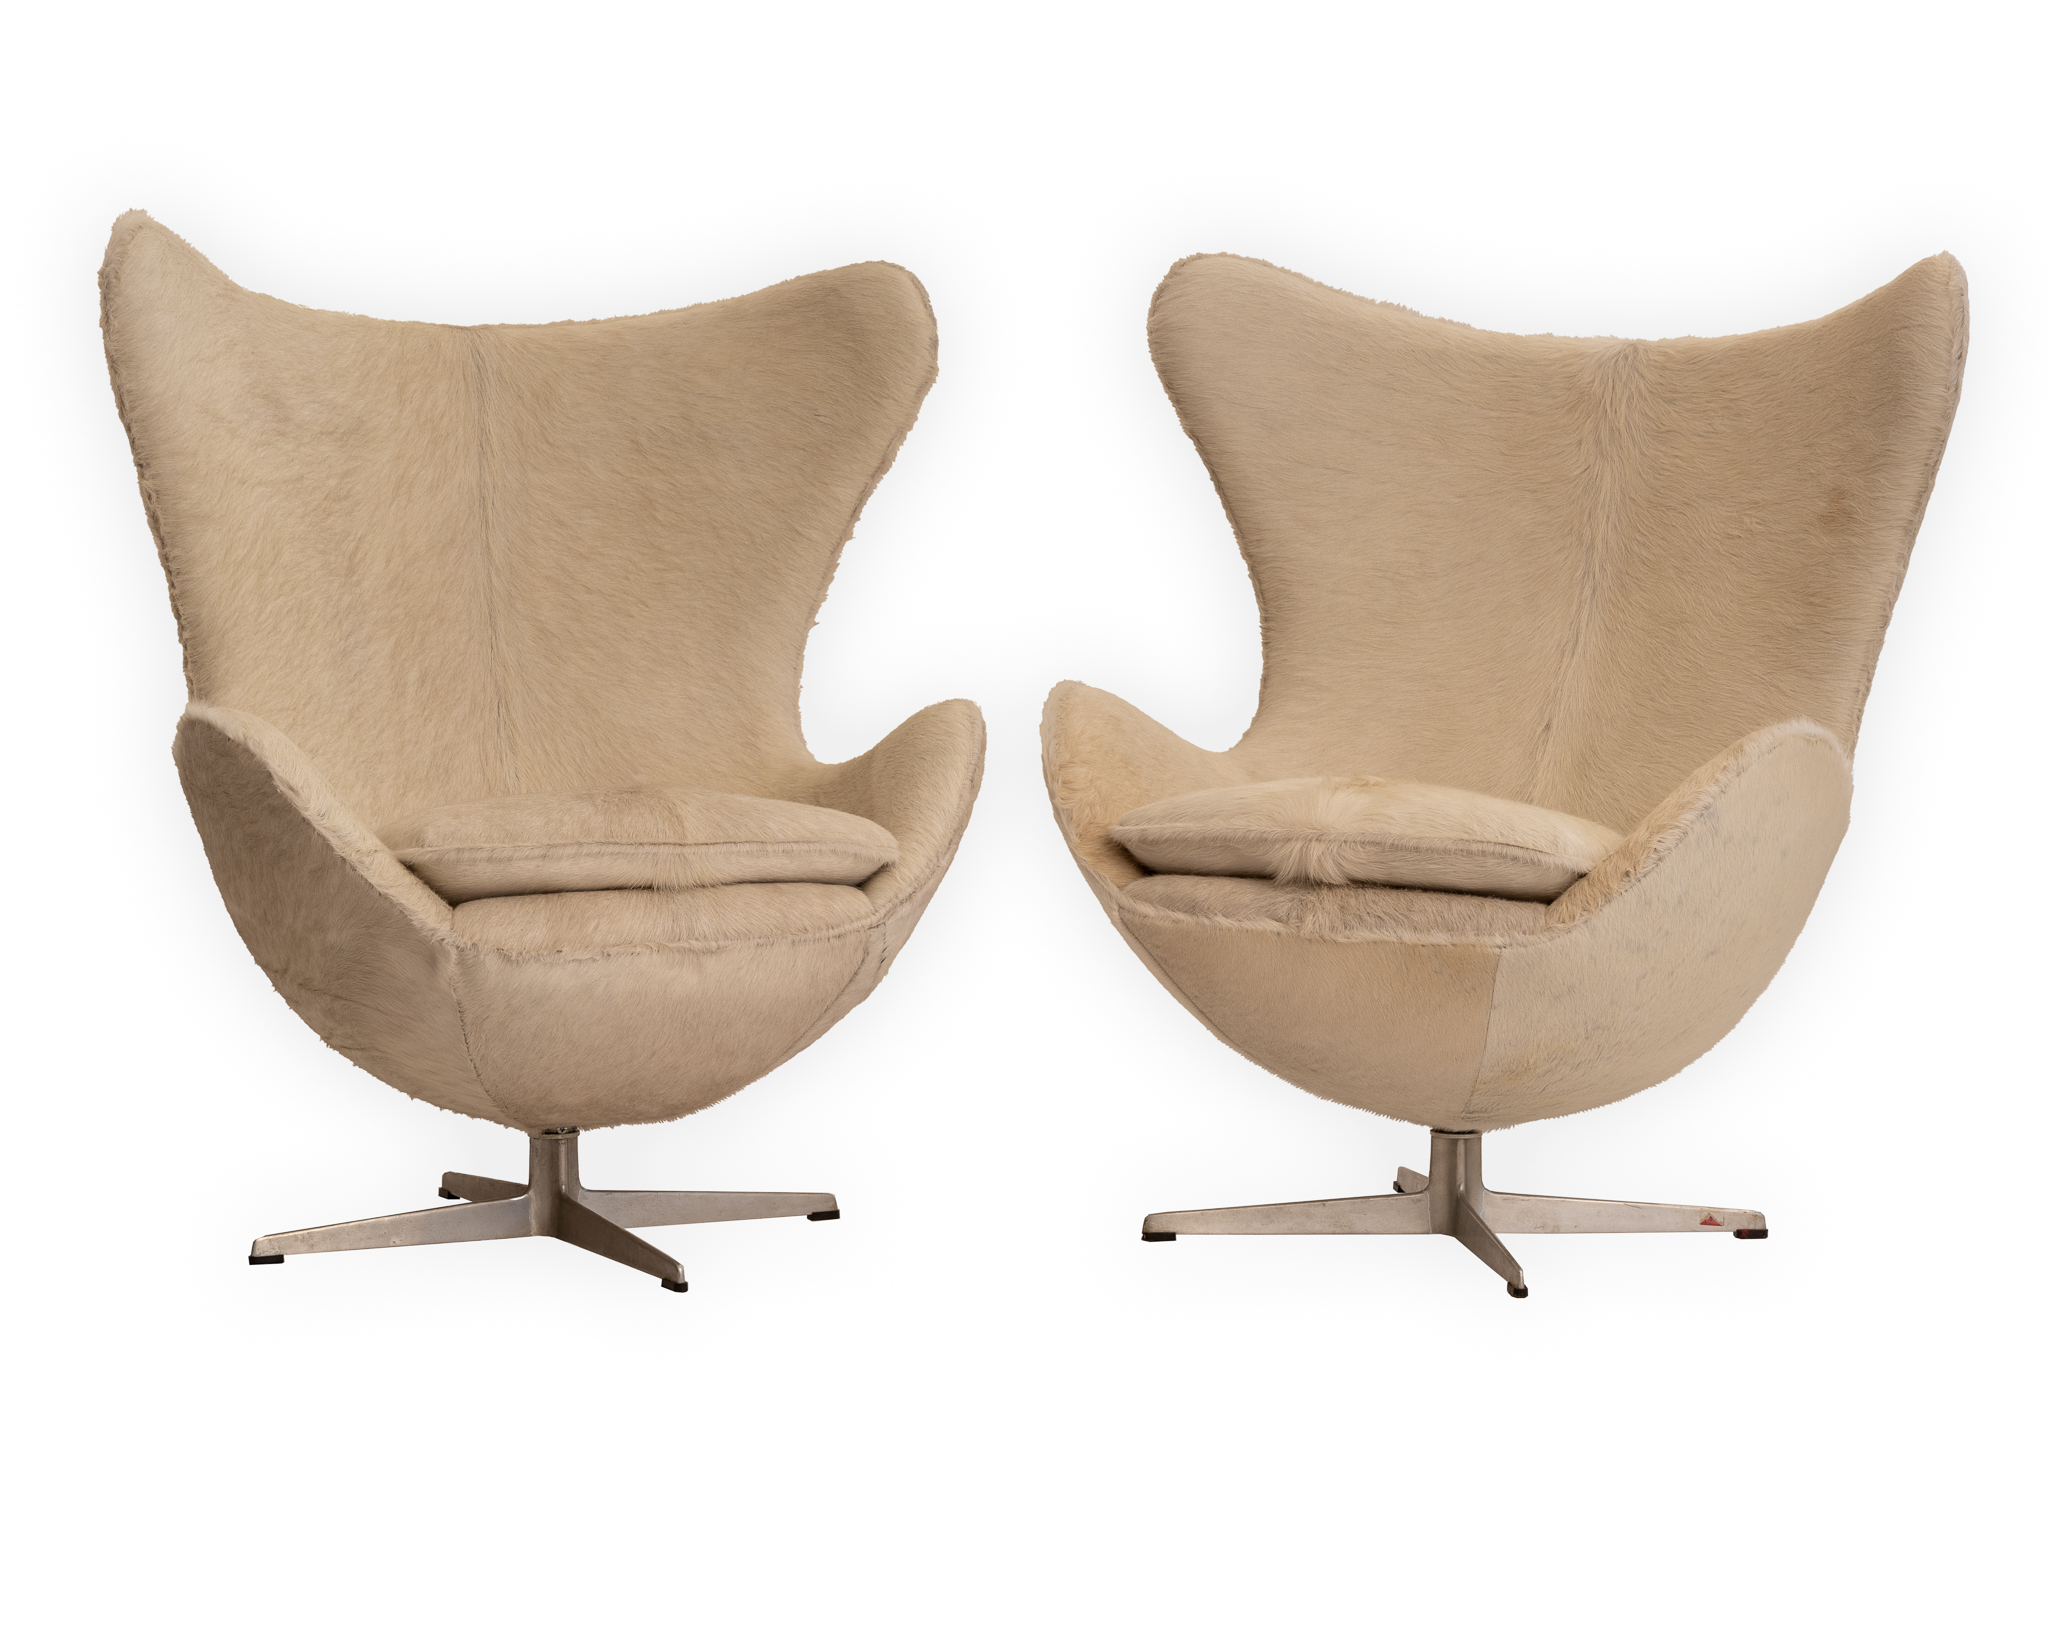 PAIR OF AME JACOBSEN EGG CHAIRS 1